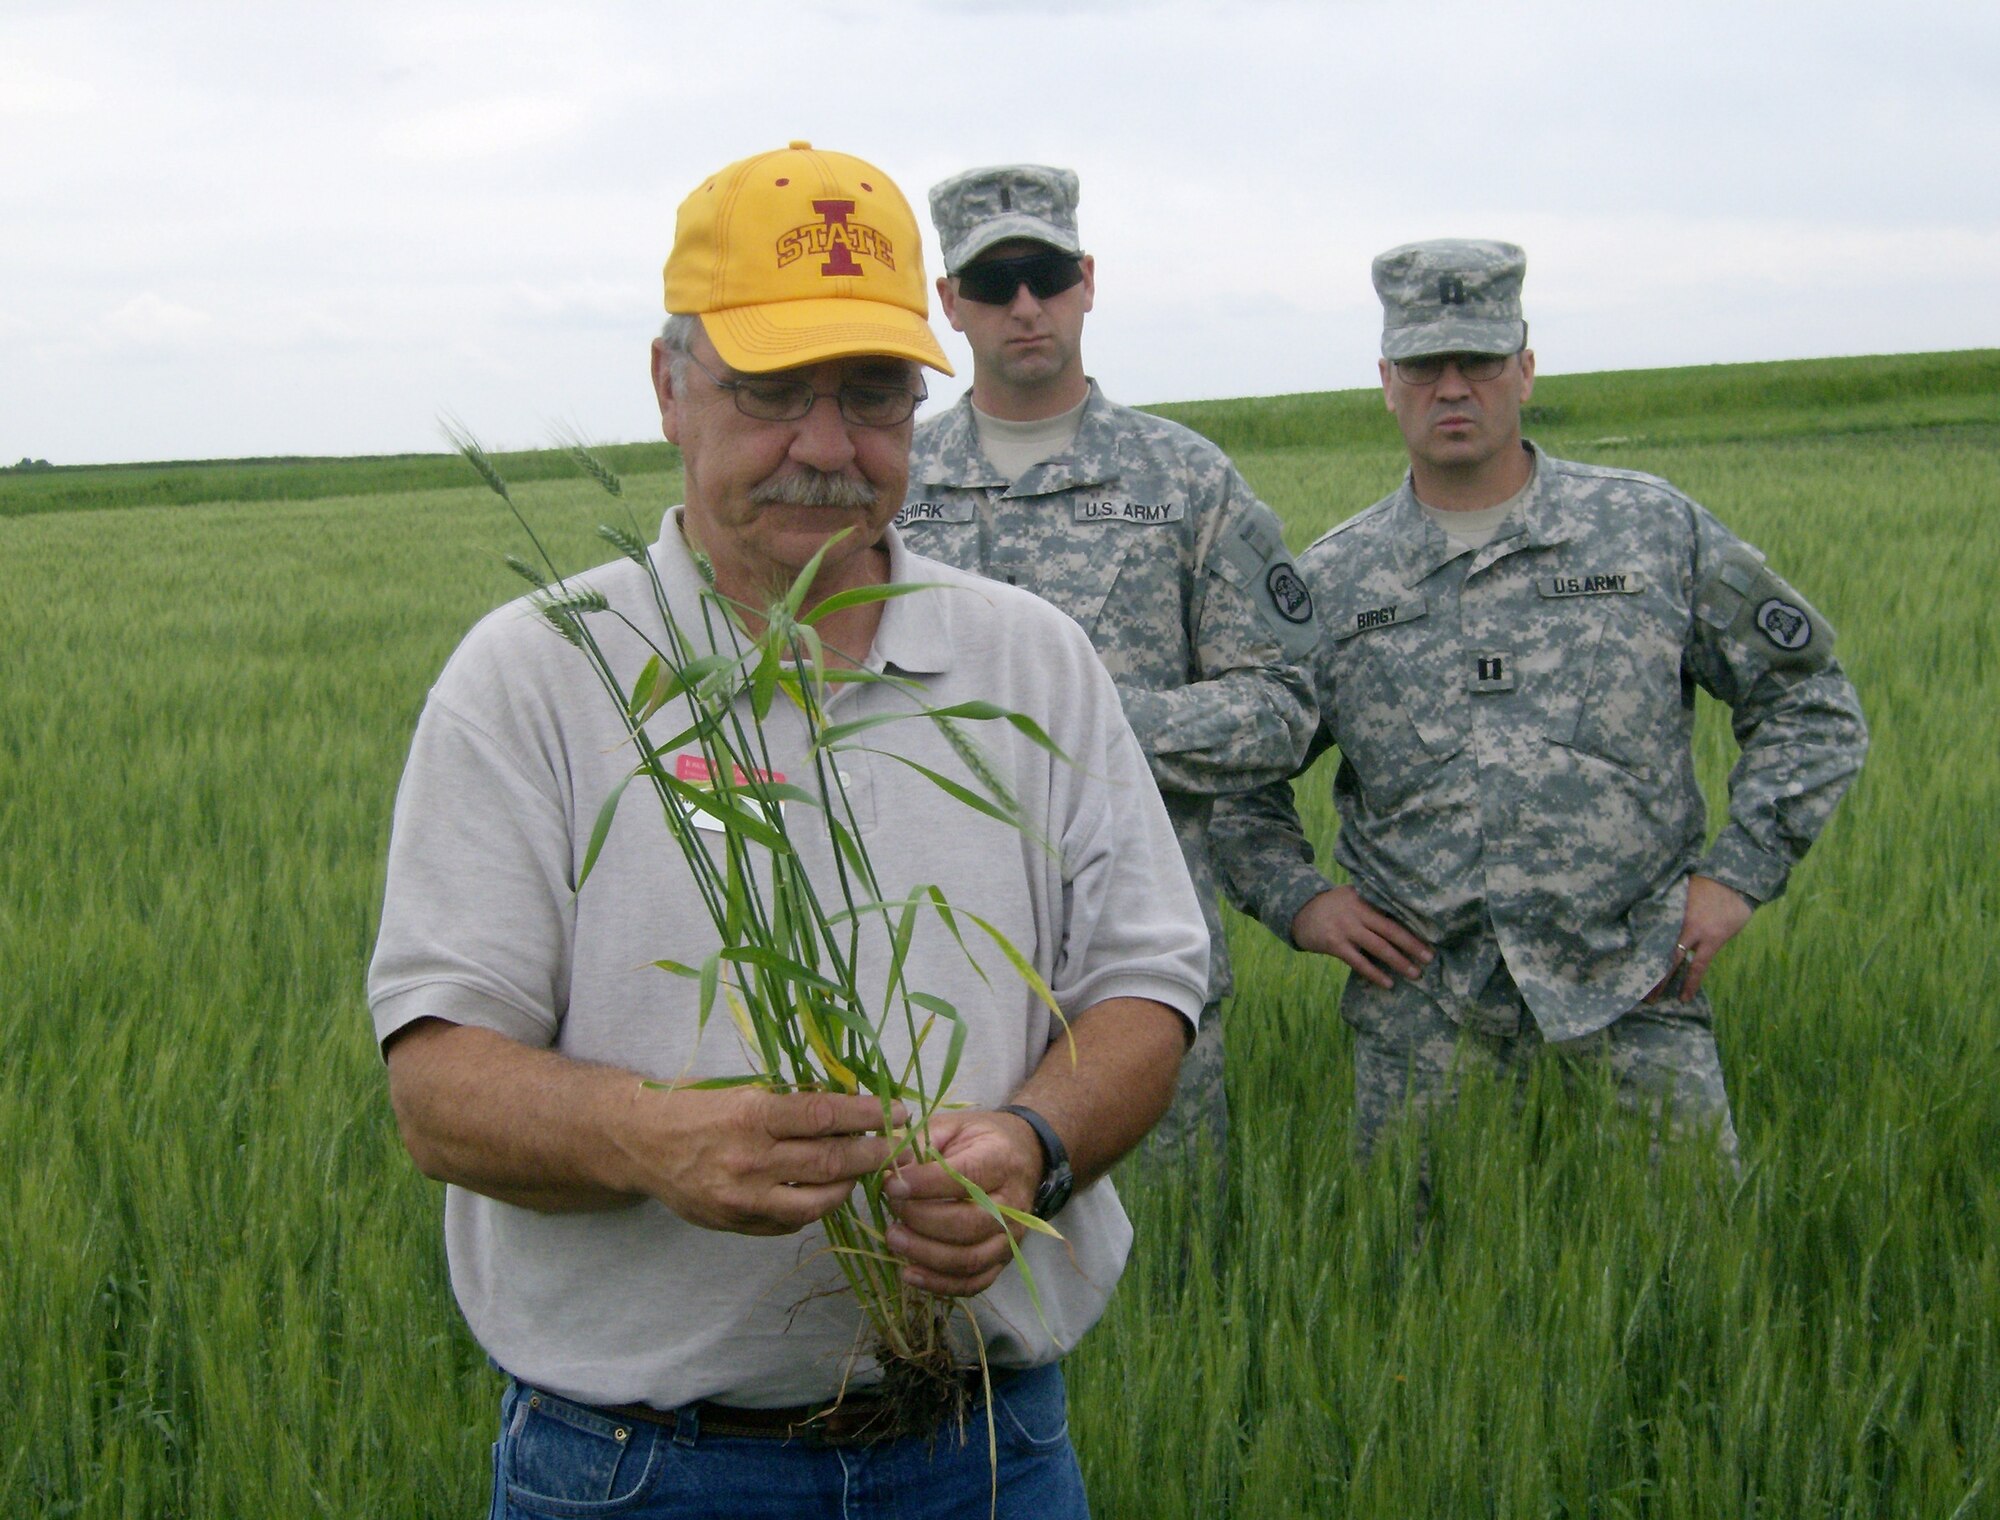 1LT Scott Shirk and CPT Patrick Birgy of the 734th Agri-Business Development Team (ADT) observe Iowa State University (ISU) Extension wheat specialist Dr. Mark Carlton examine a wheat plant for disease during ISU-ADT agriculture training.